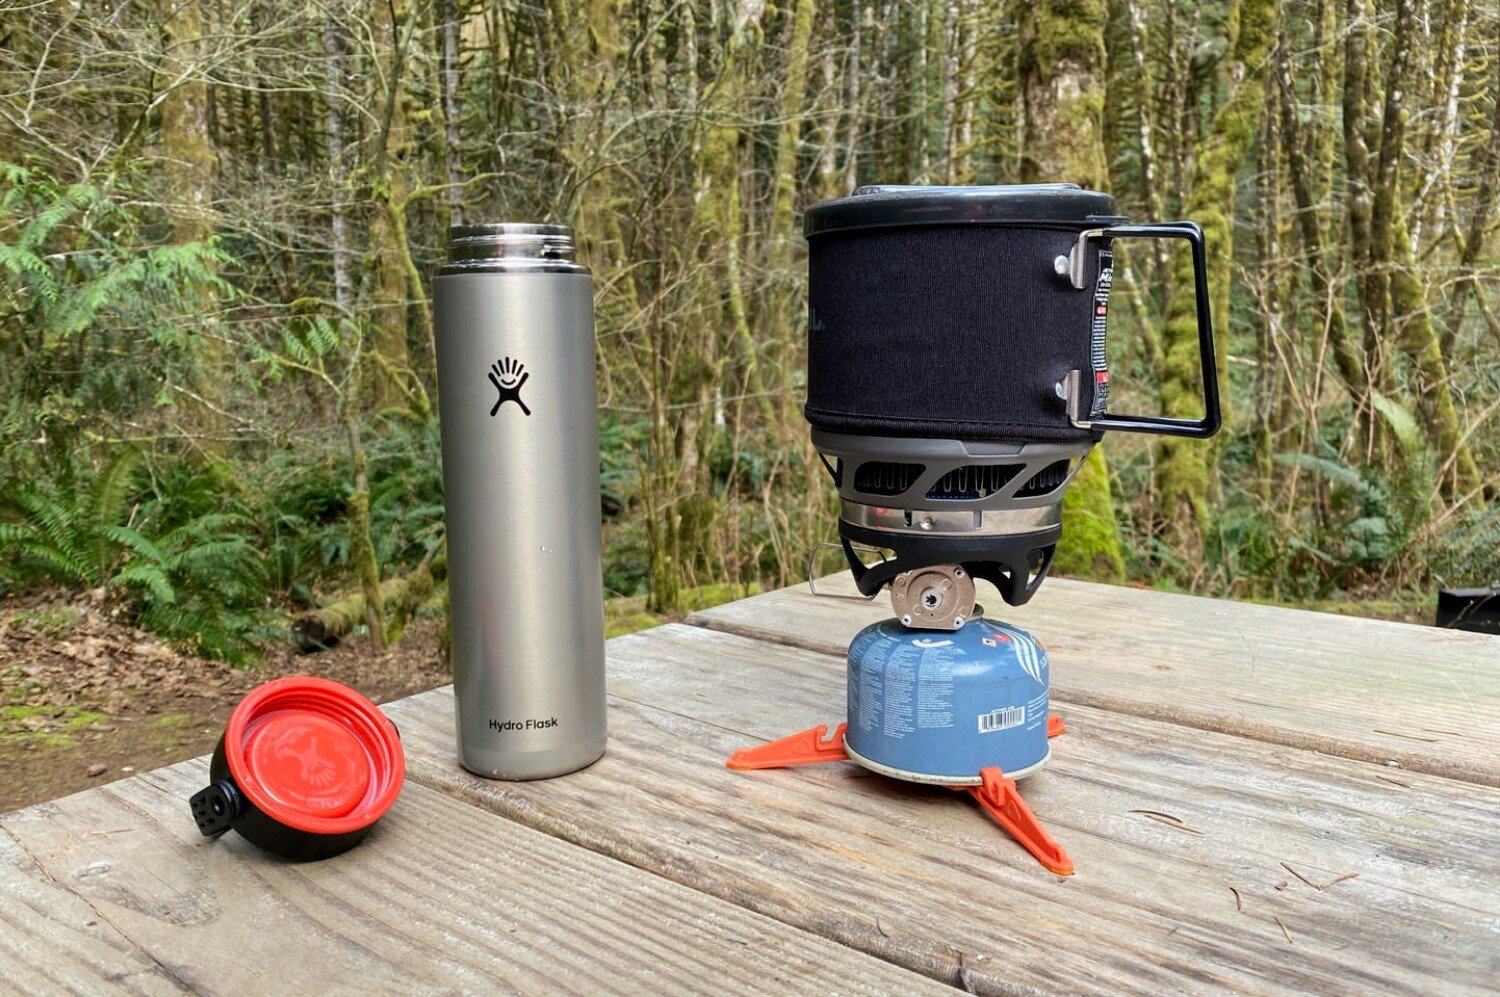 Boiling water in the Jetboil Minimo Integrated Canister Stove System while camping in the Pacific Northwest to make hot tea in the Hydro Flask Lightwe.jpeg